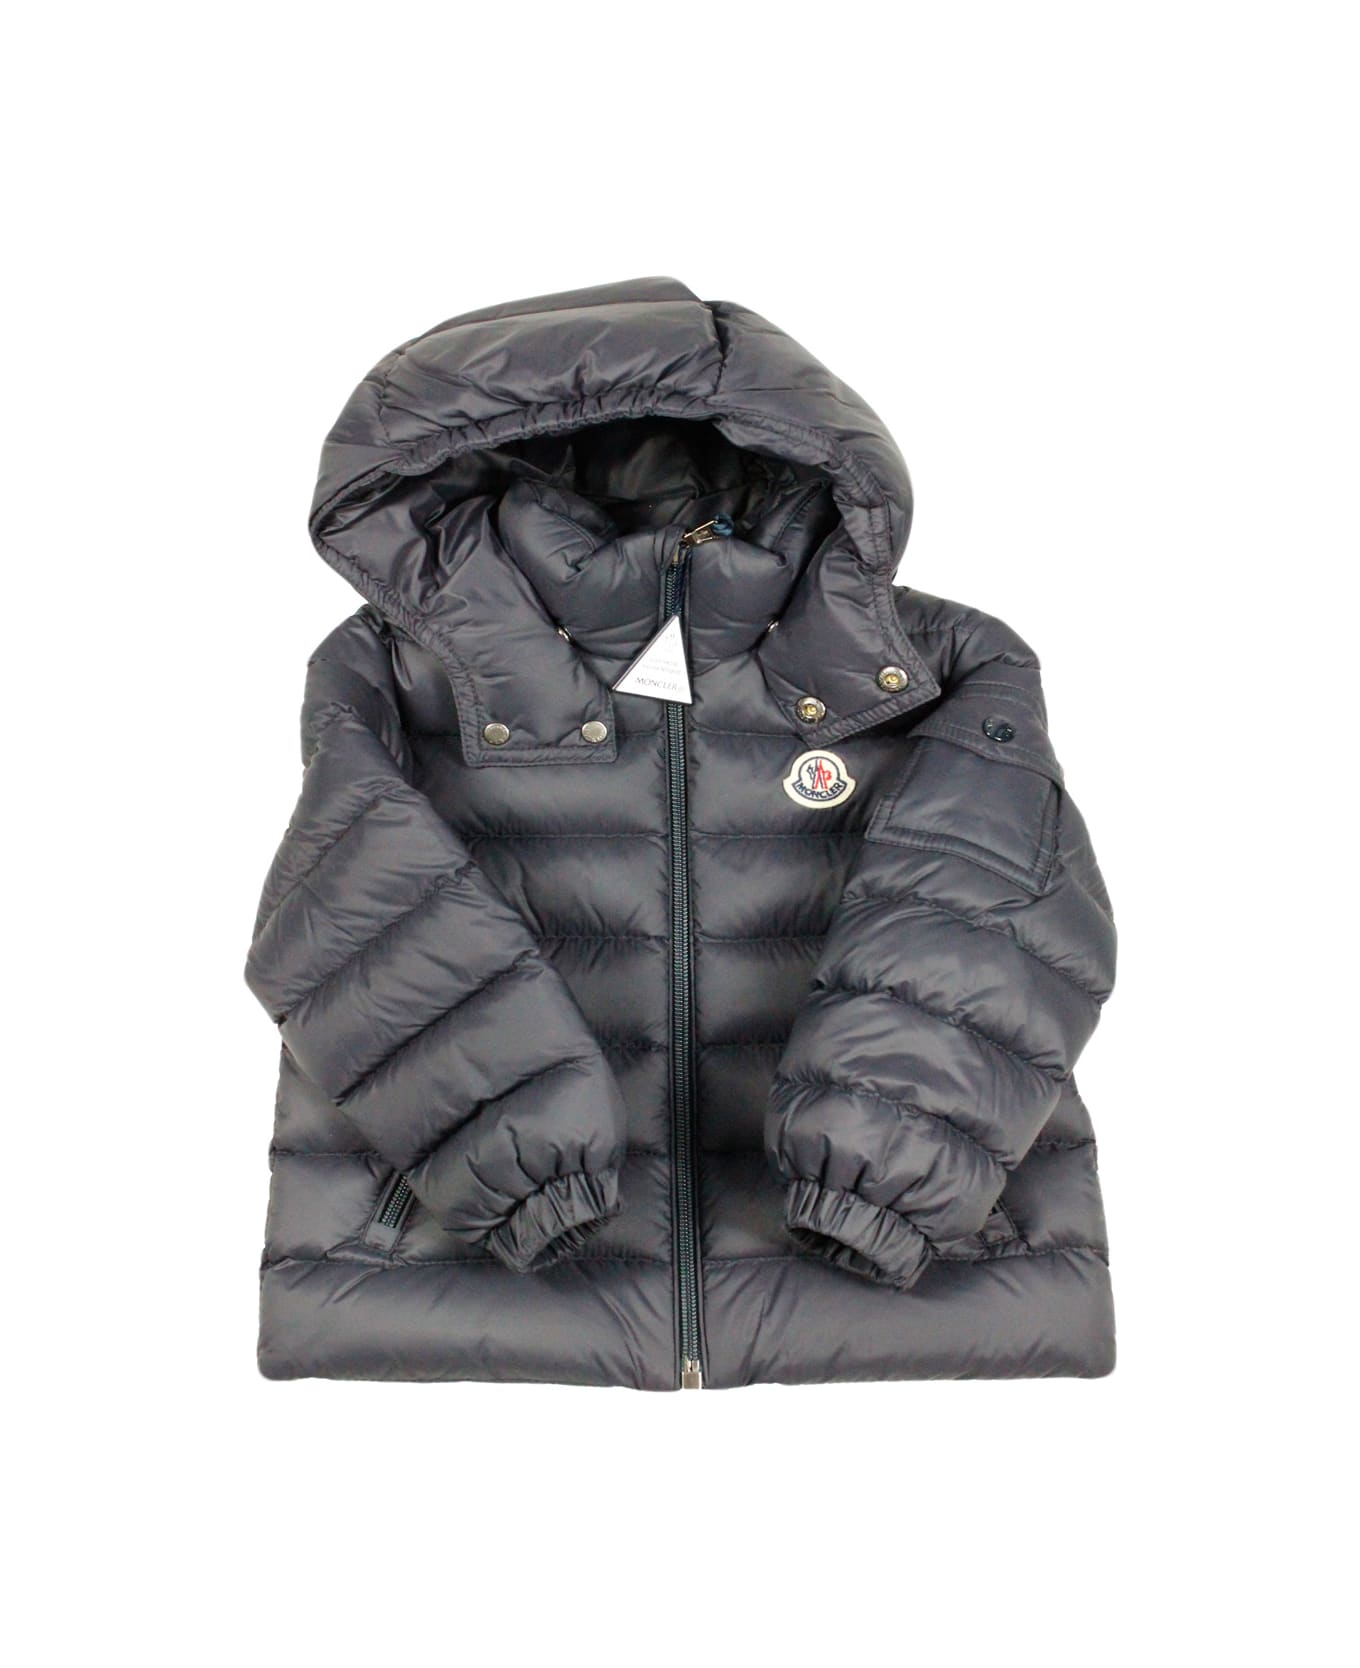 Moncler Jules Down Jacket Filled With Real Goose Down With Detachable Hood And Zip Closure-. - Blu